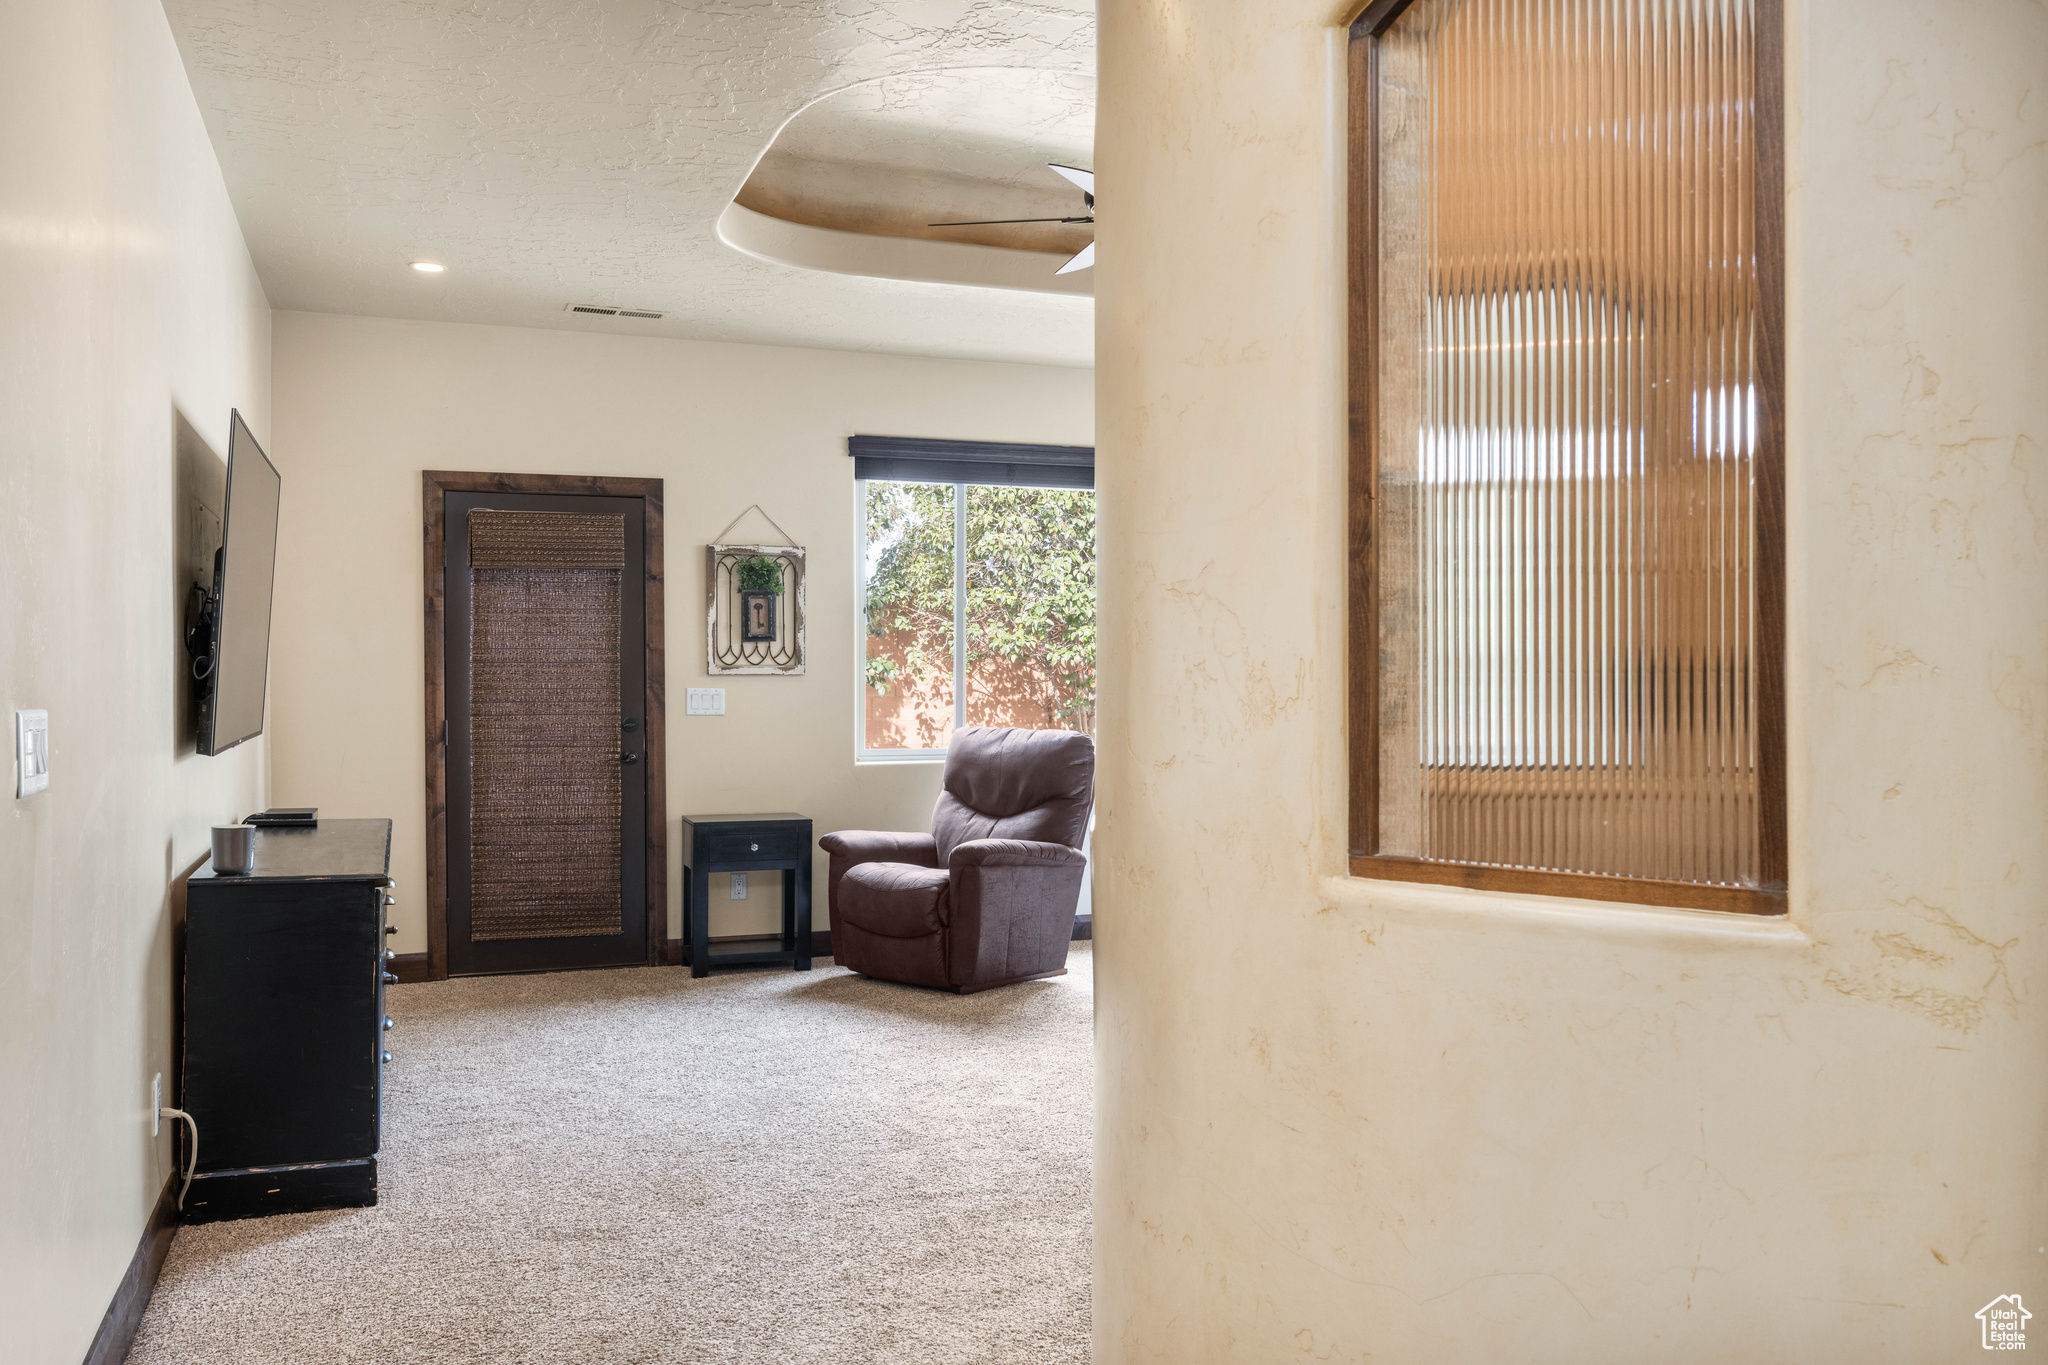 Interior space featuring ceiling fan, carpet floors, and a textured ceiling